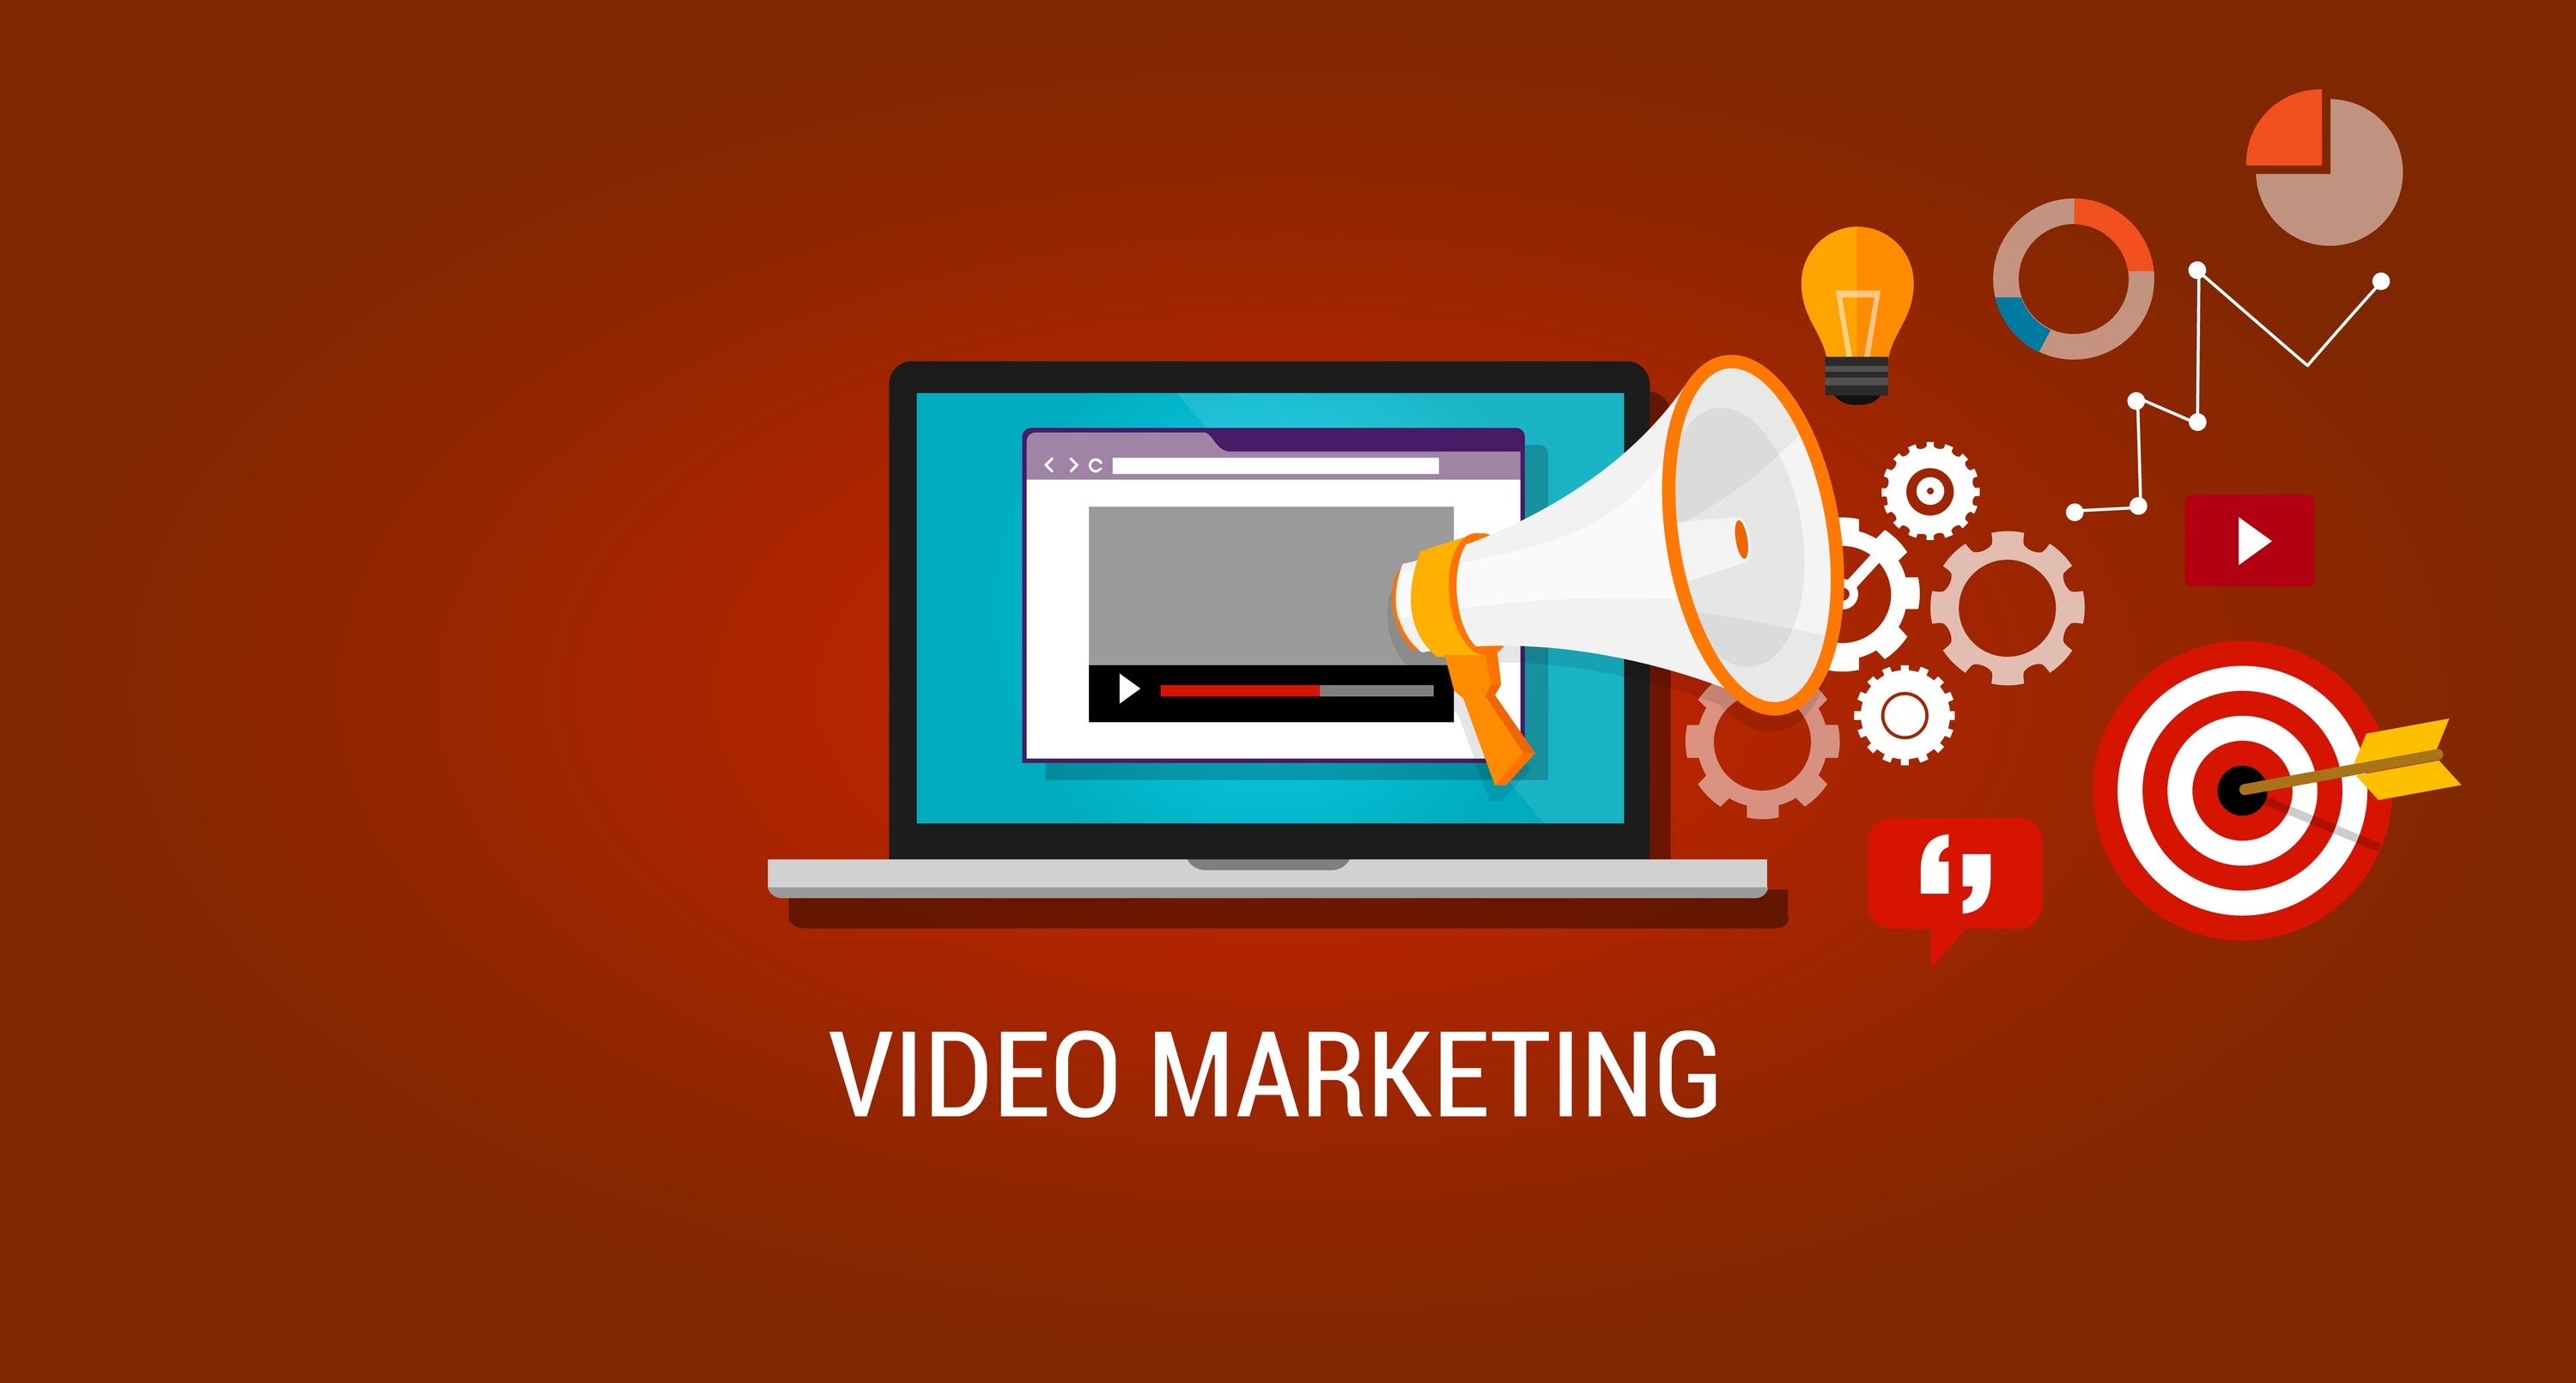 Considered video marketing for your business? You should!